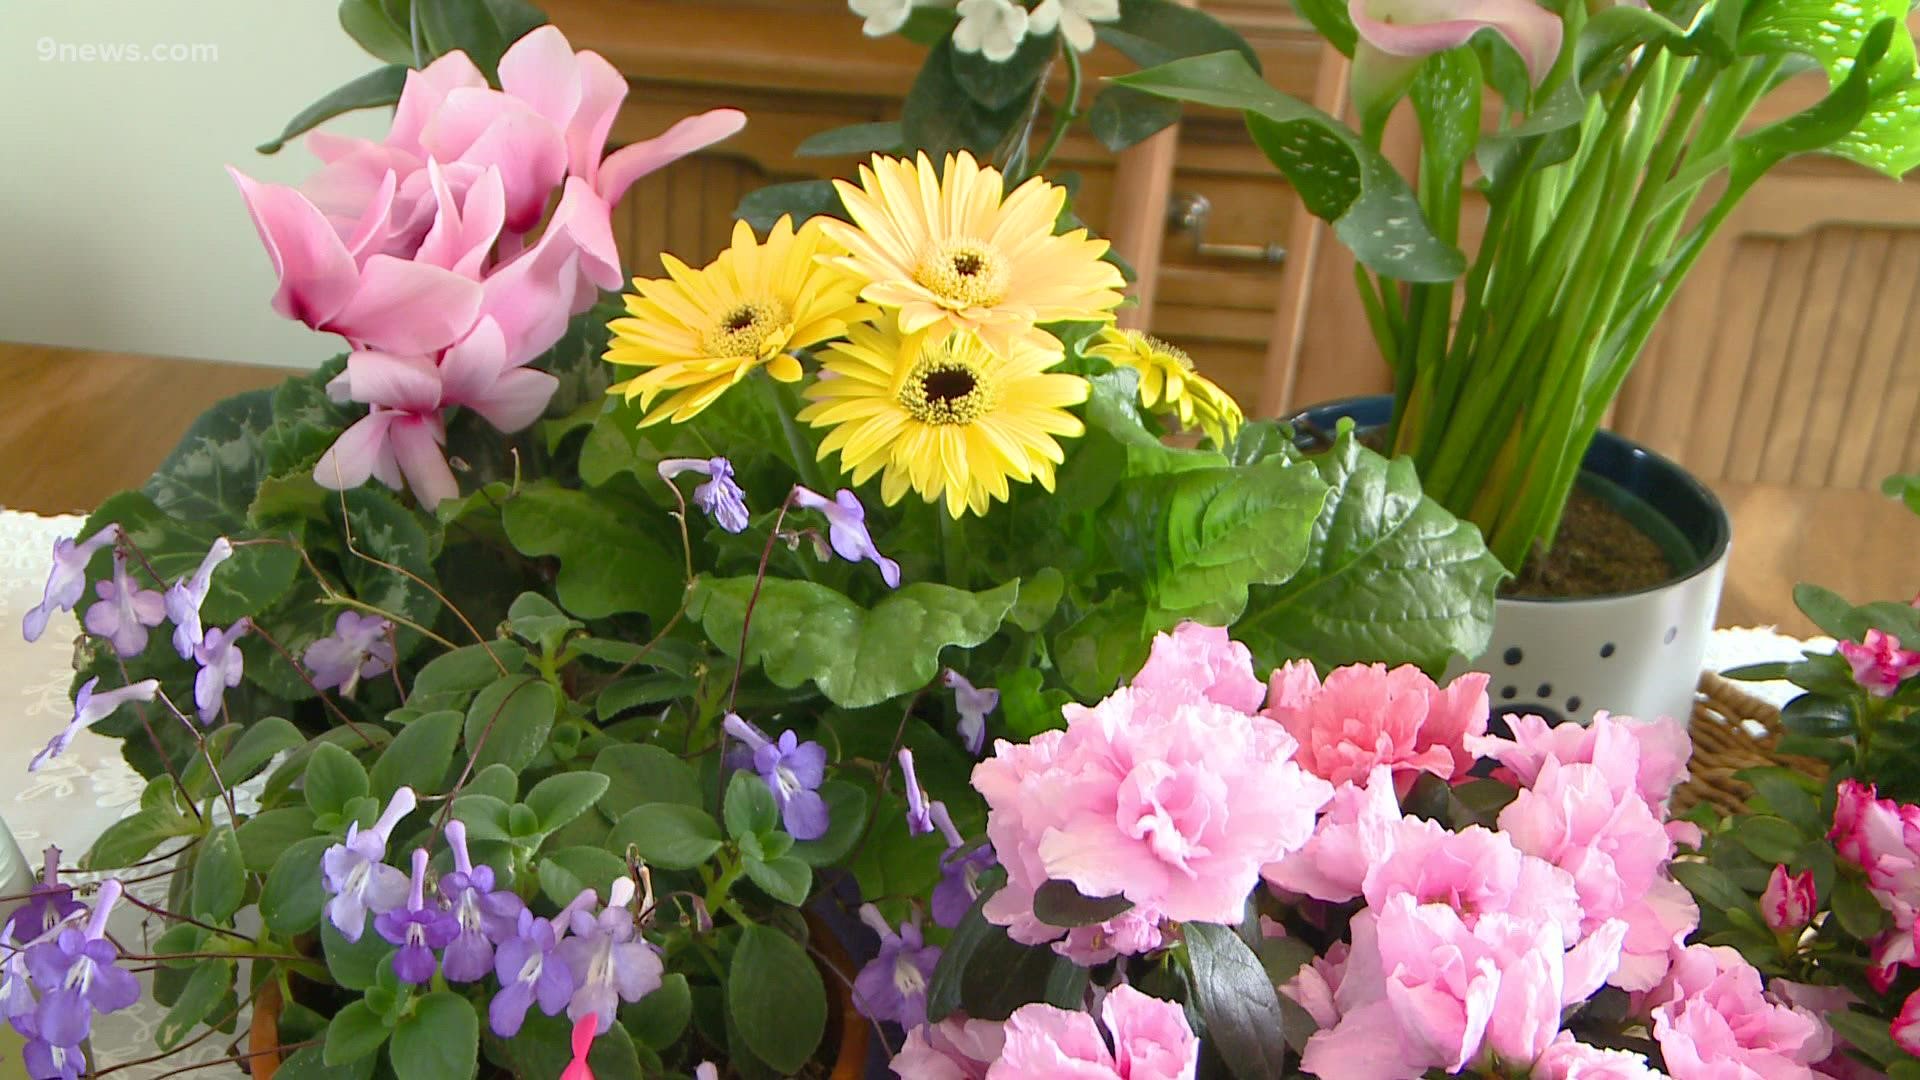 Just like your outdoor blooming plants, indoor blooming plants require more light.